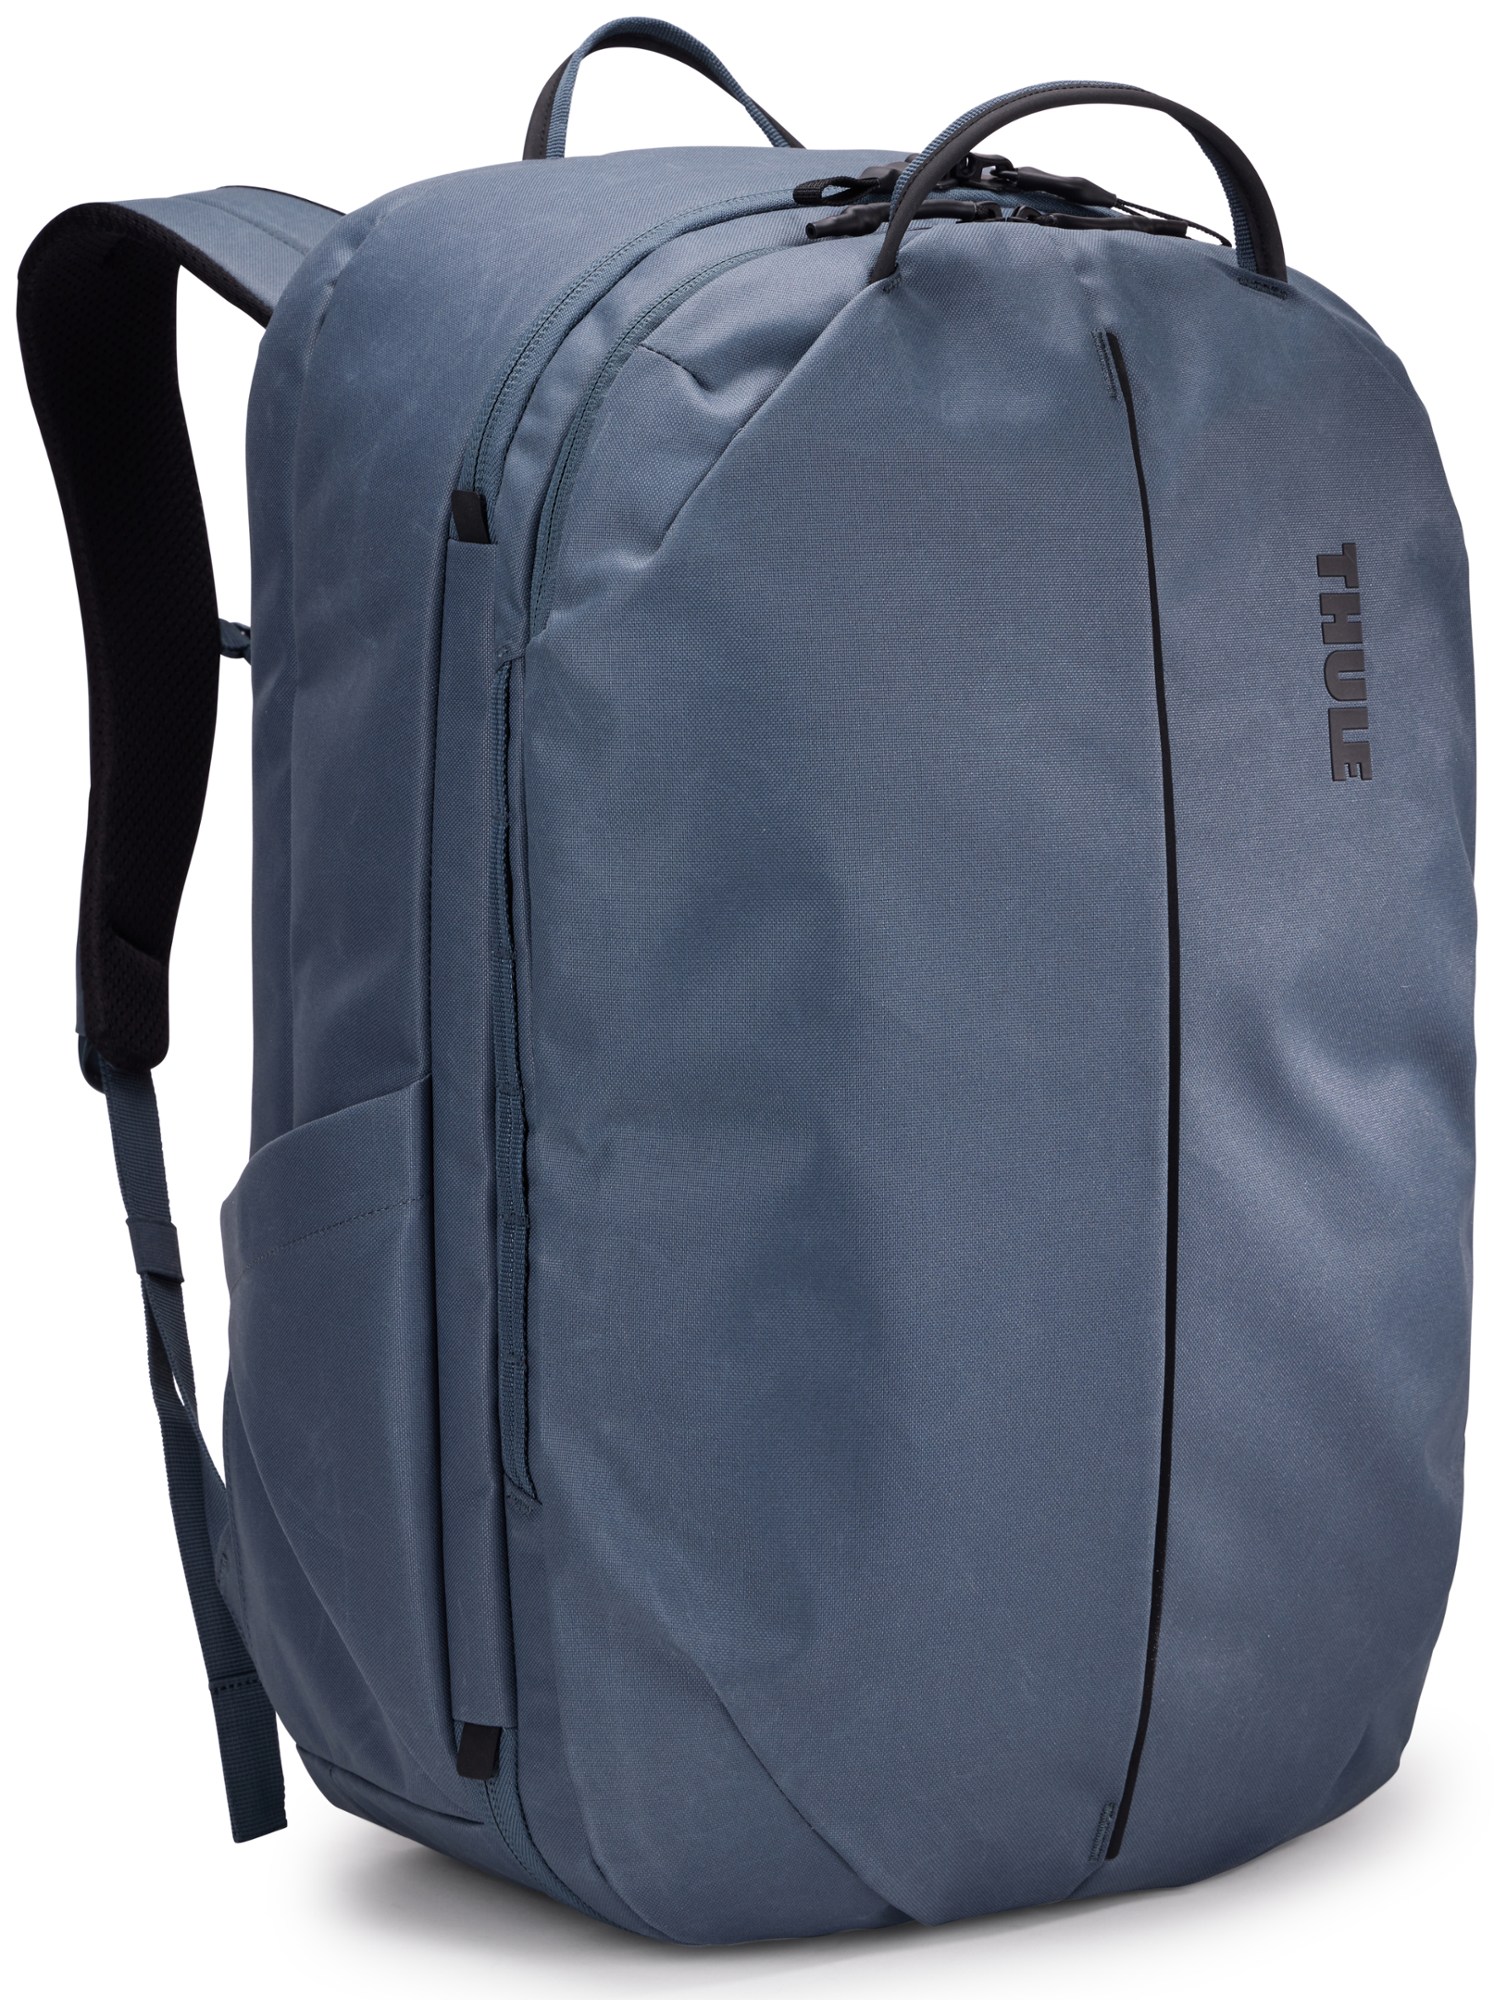 Thule Aion travel backpack